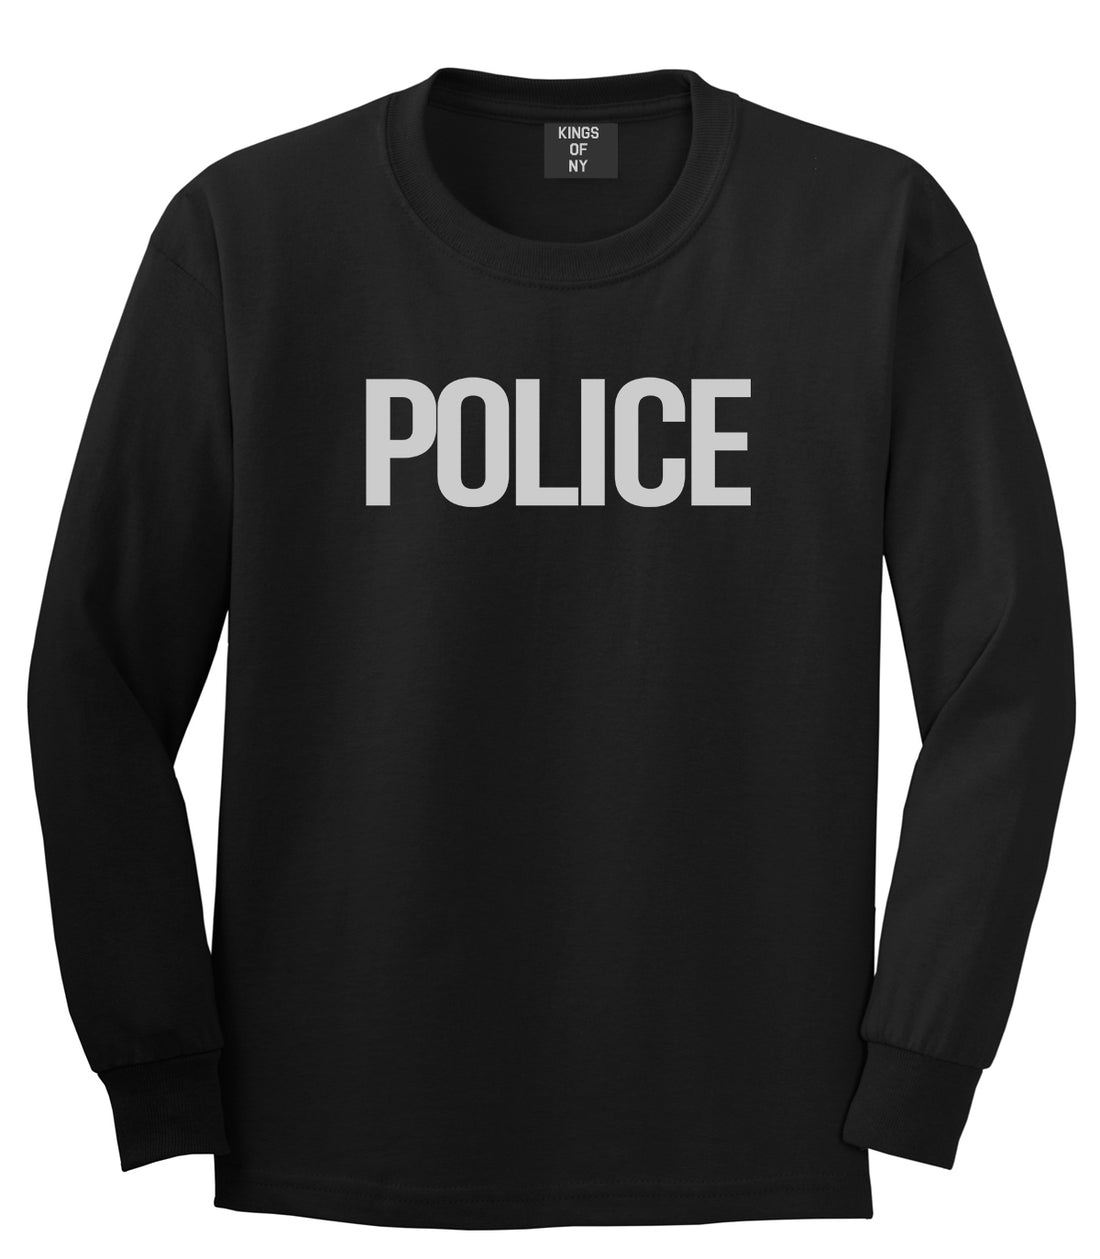 Police Uniform Cop Costume Mens Long Sleeve T-Shirt Black by Kings Of NY